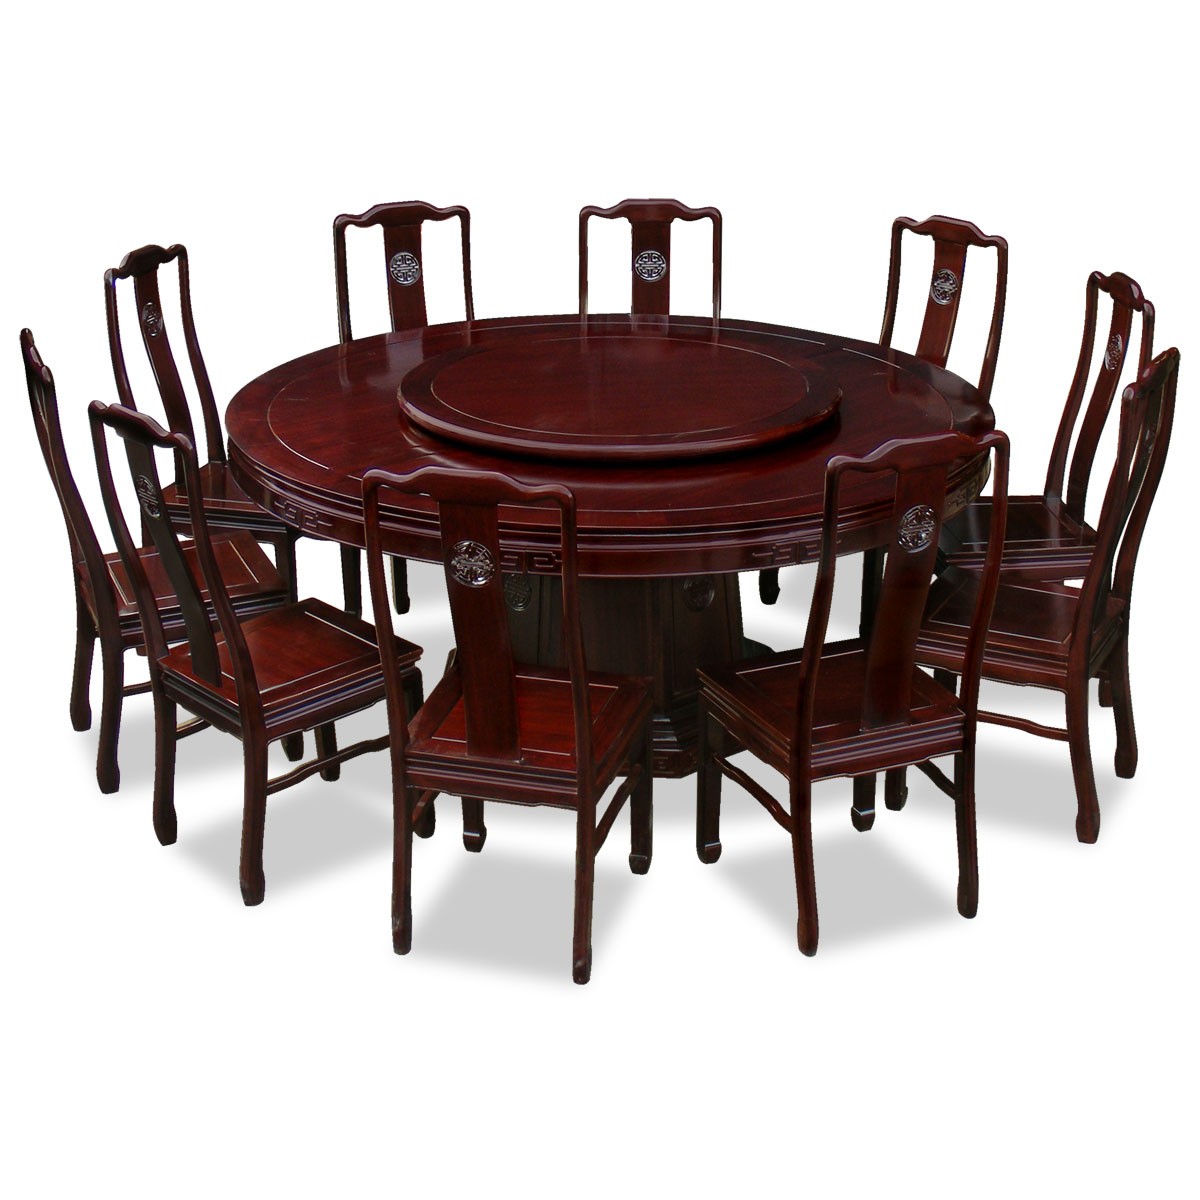 Round Dining Table Seats 10 - Ideas on Foter